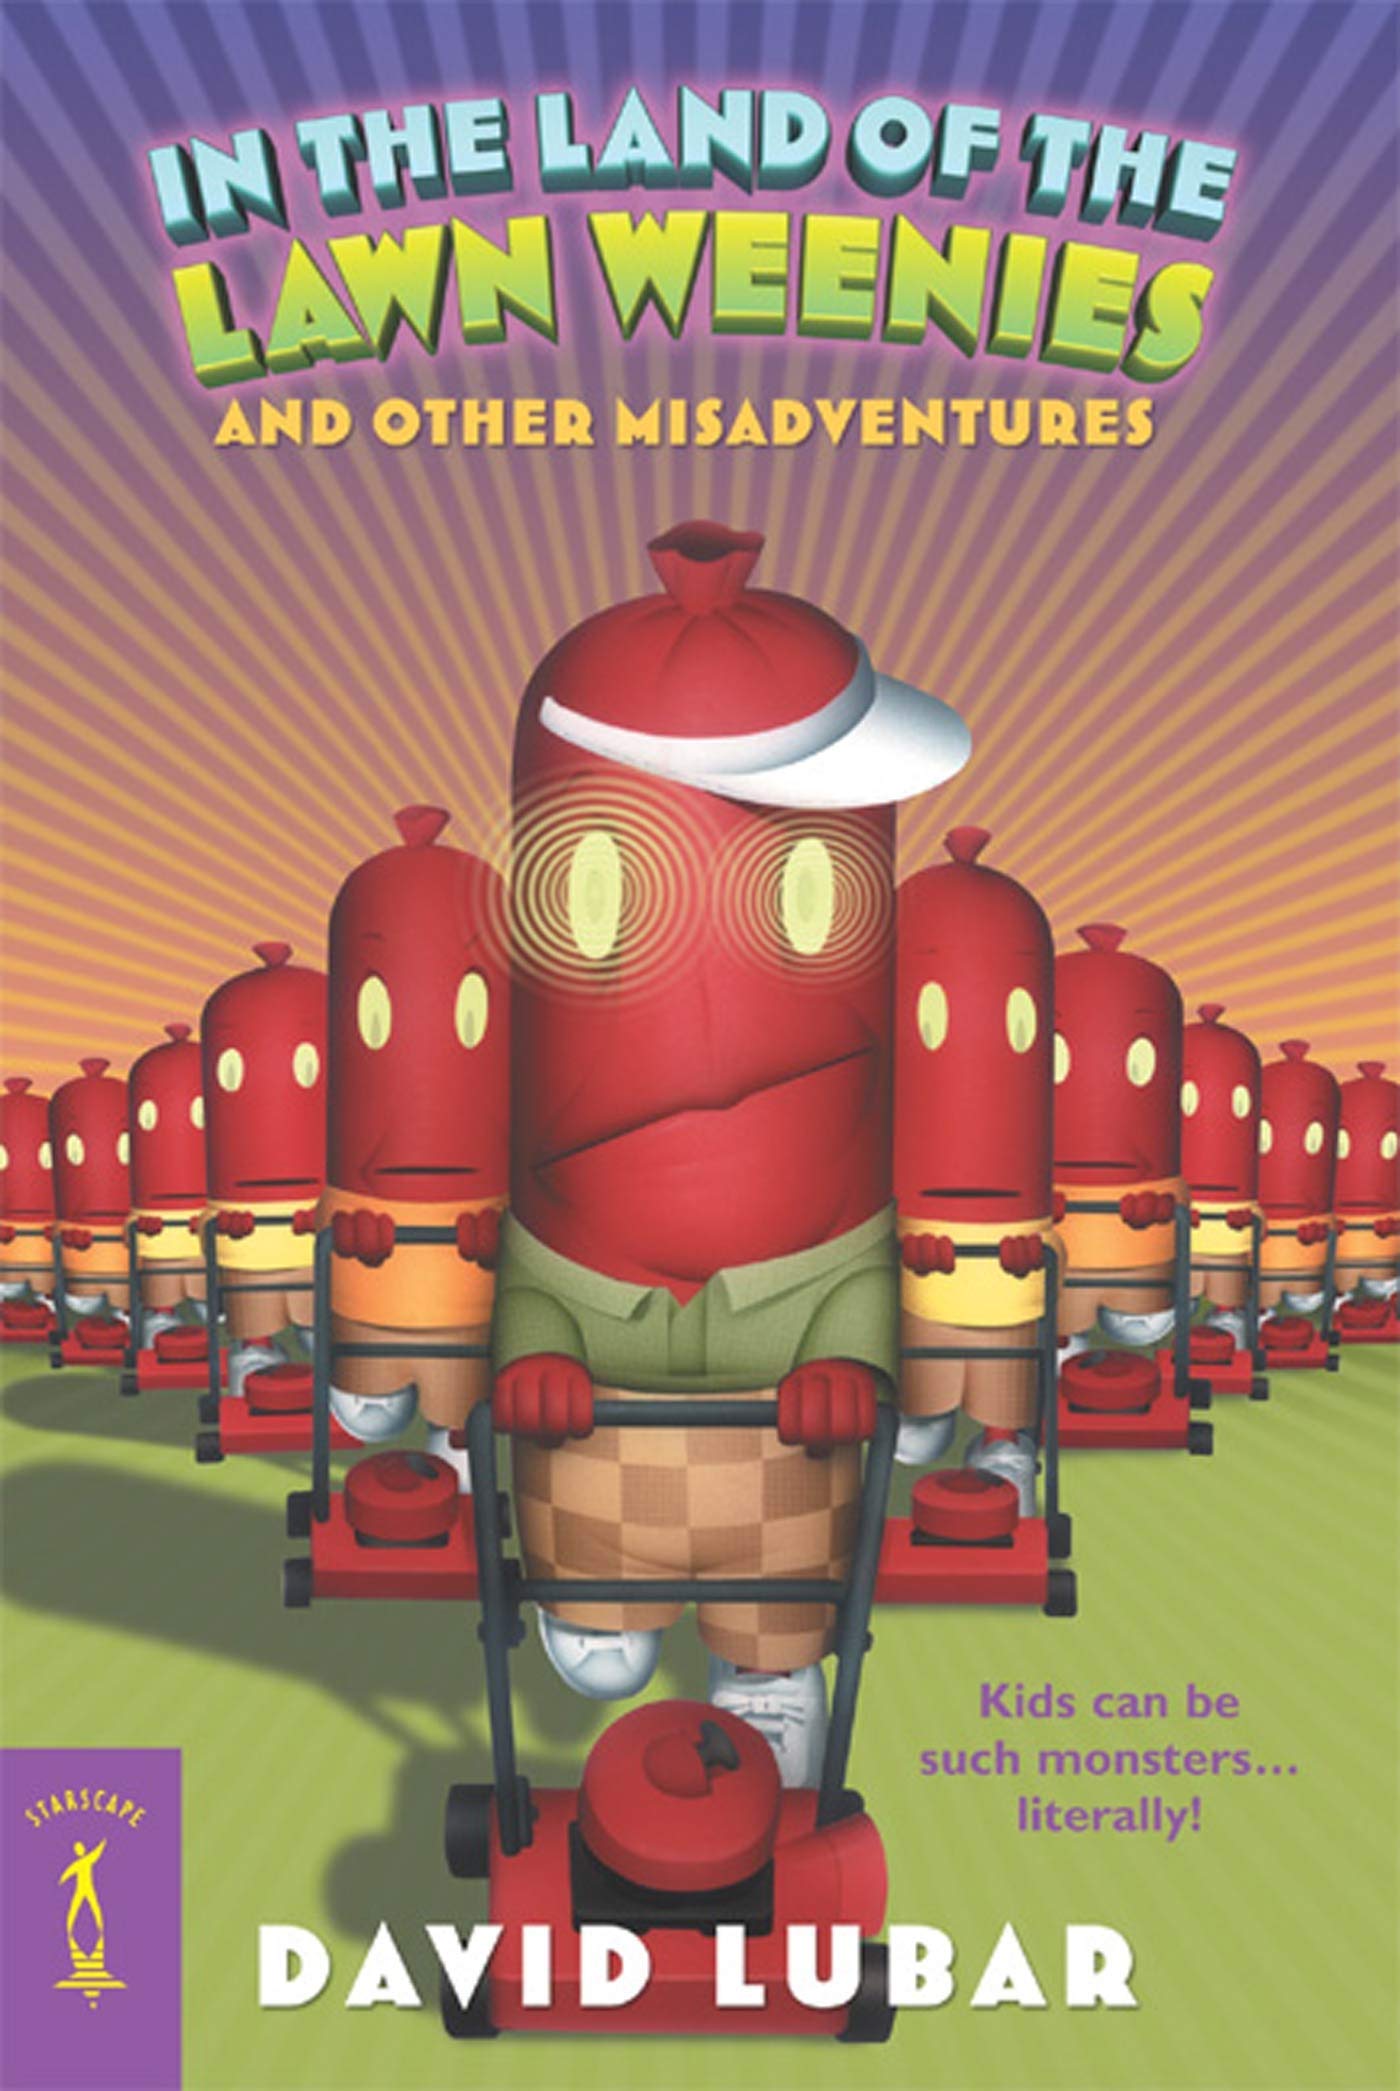 Image of the cover of "In the Land of the Lawn Weenies and Other Misadventures" by David Lubar. The cover shows hot dogs with faces and dressed like humans. The hot dogs are all pushing red lawnmowers. The tagline in the bottom right of the cover reads "Kids can be such monsters... literally!" 